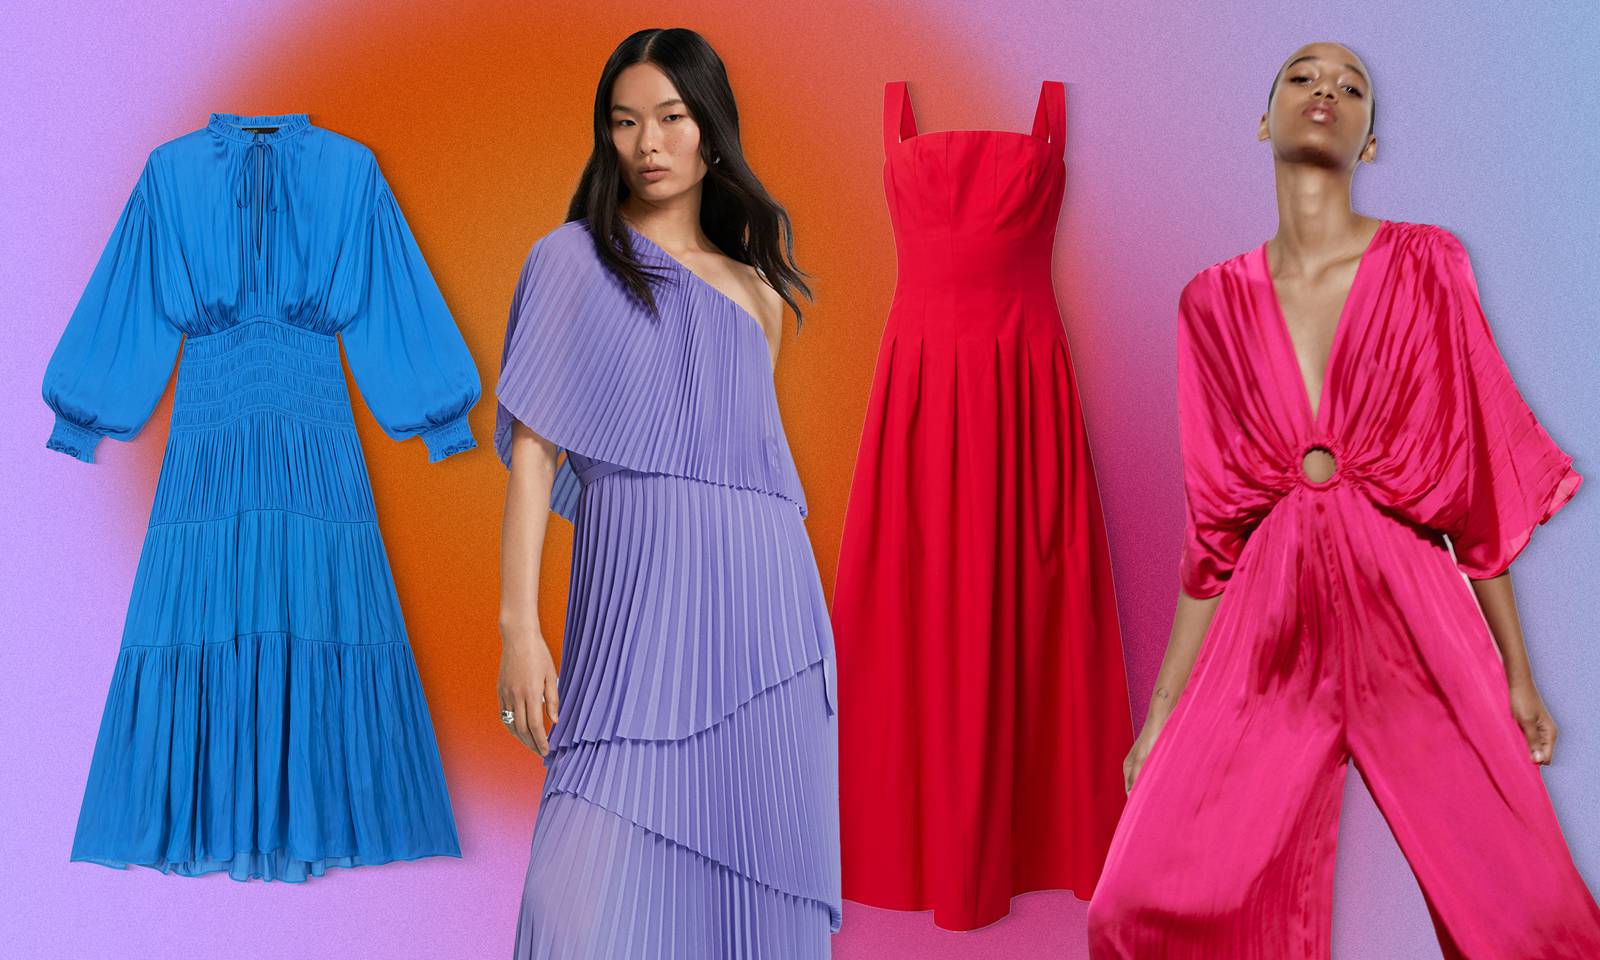 'Let the shape of the dress do the talking rather than the print.' Pictured: Smocked midi dress, €295,Maje Rovel; layered plisse dress, €179, & Other Stories; poplin dress, €310, Reformation at Brown Thomas; and satin jumpsuit, €49.95, Zara.